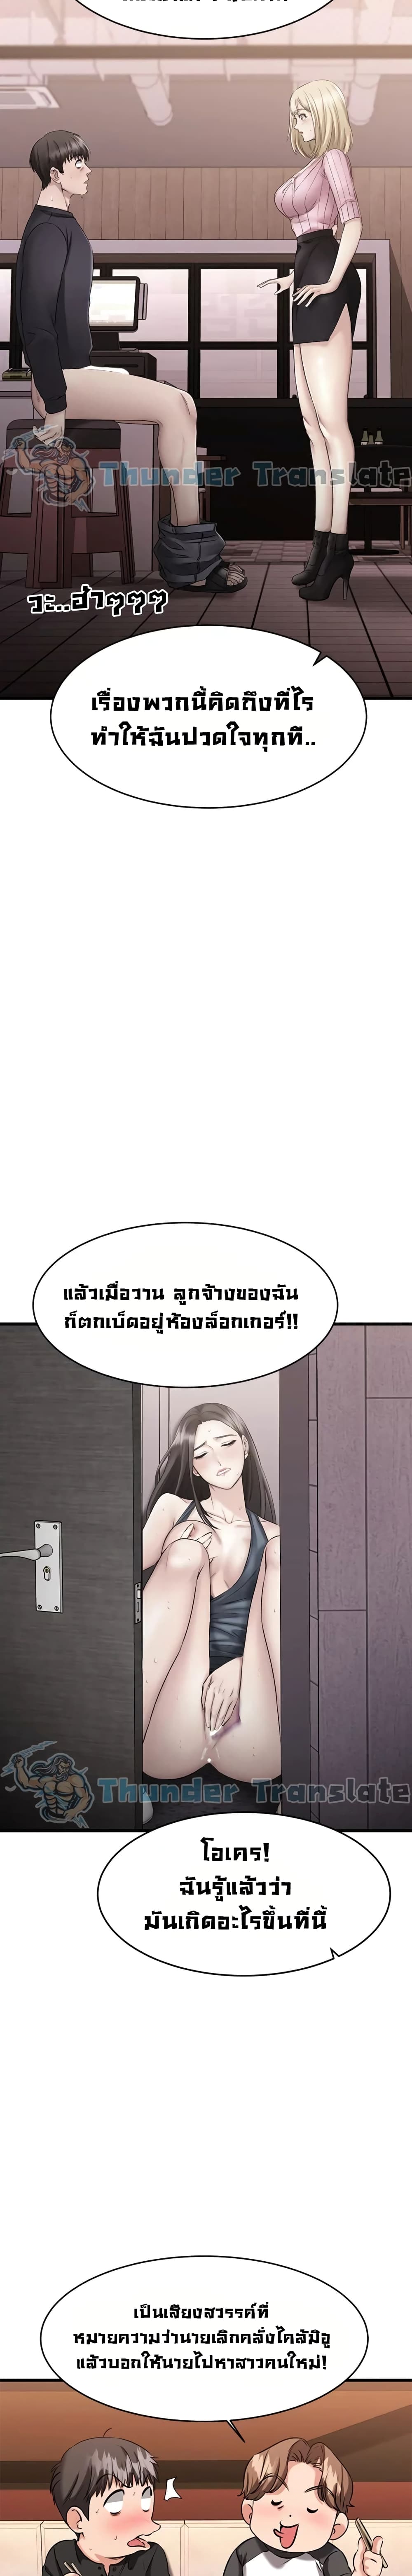 My Female Friend Who Crossed The Line 10 ภาพที่ 9